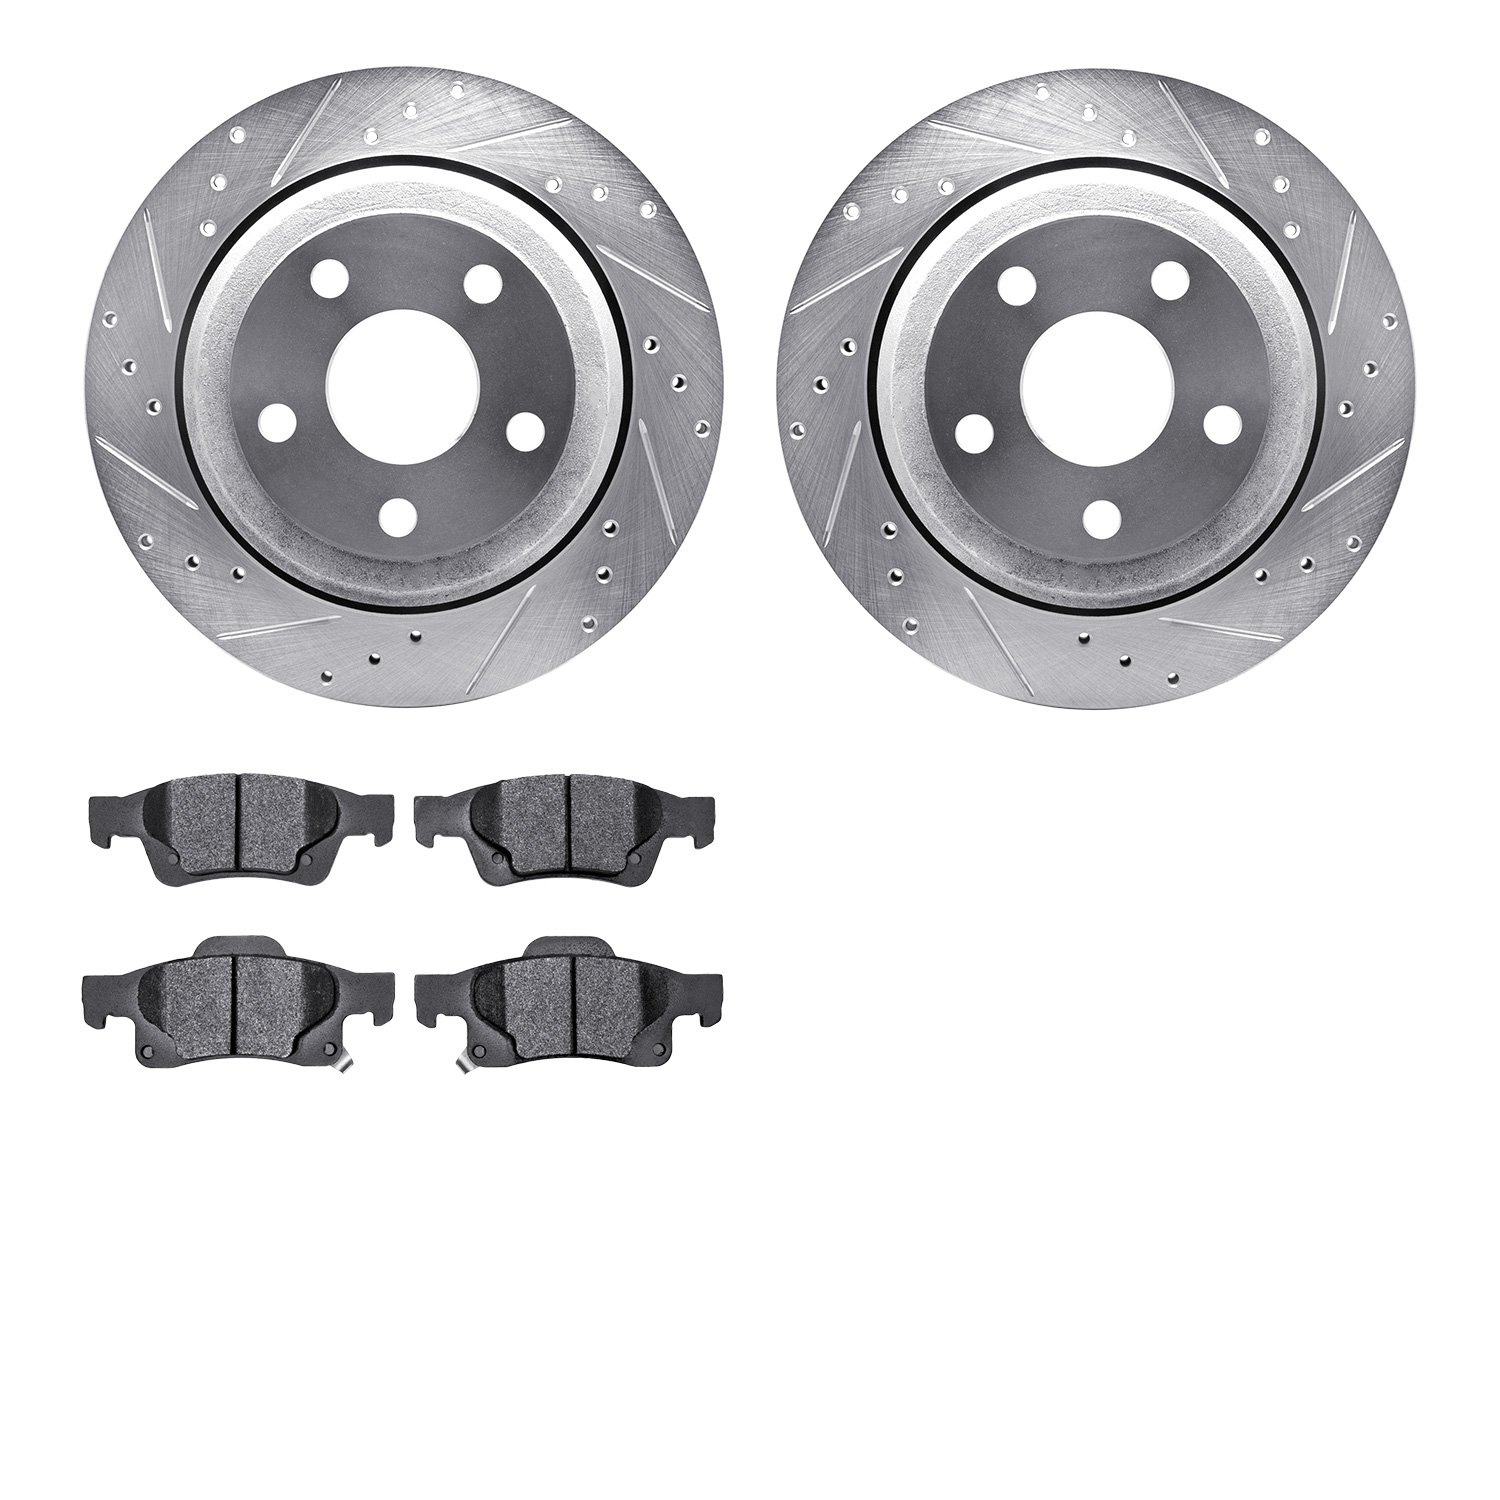 7402-42007 Drilled/Slotted Brake Rotors with Ultimate-Duty Brake Pads Kit [Silver], Fits Select Mopar, Position: Rear